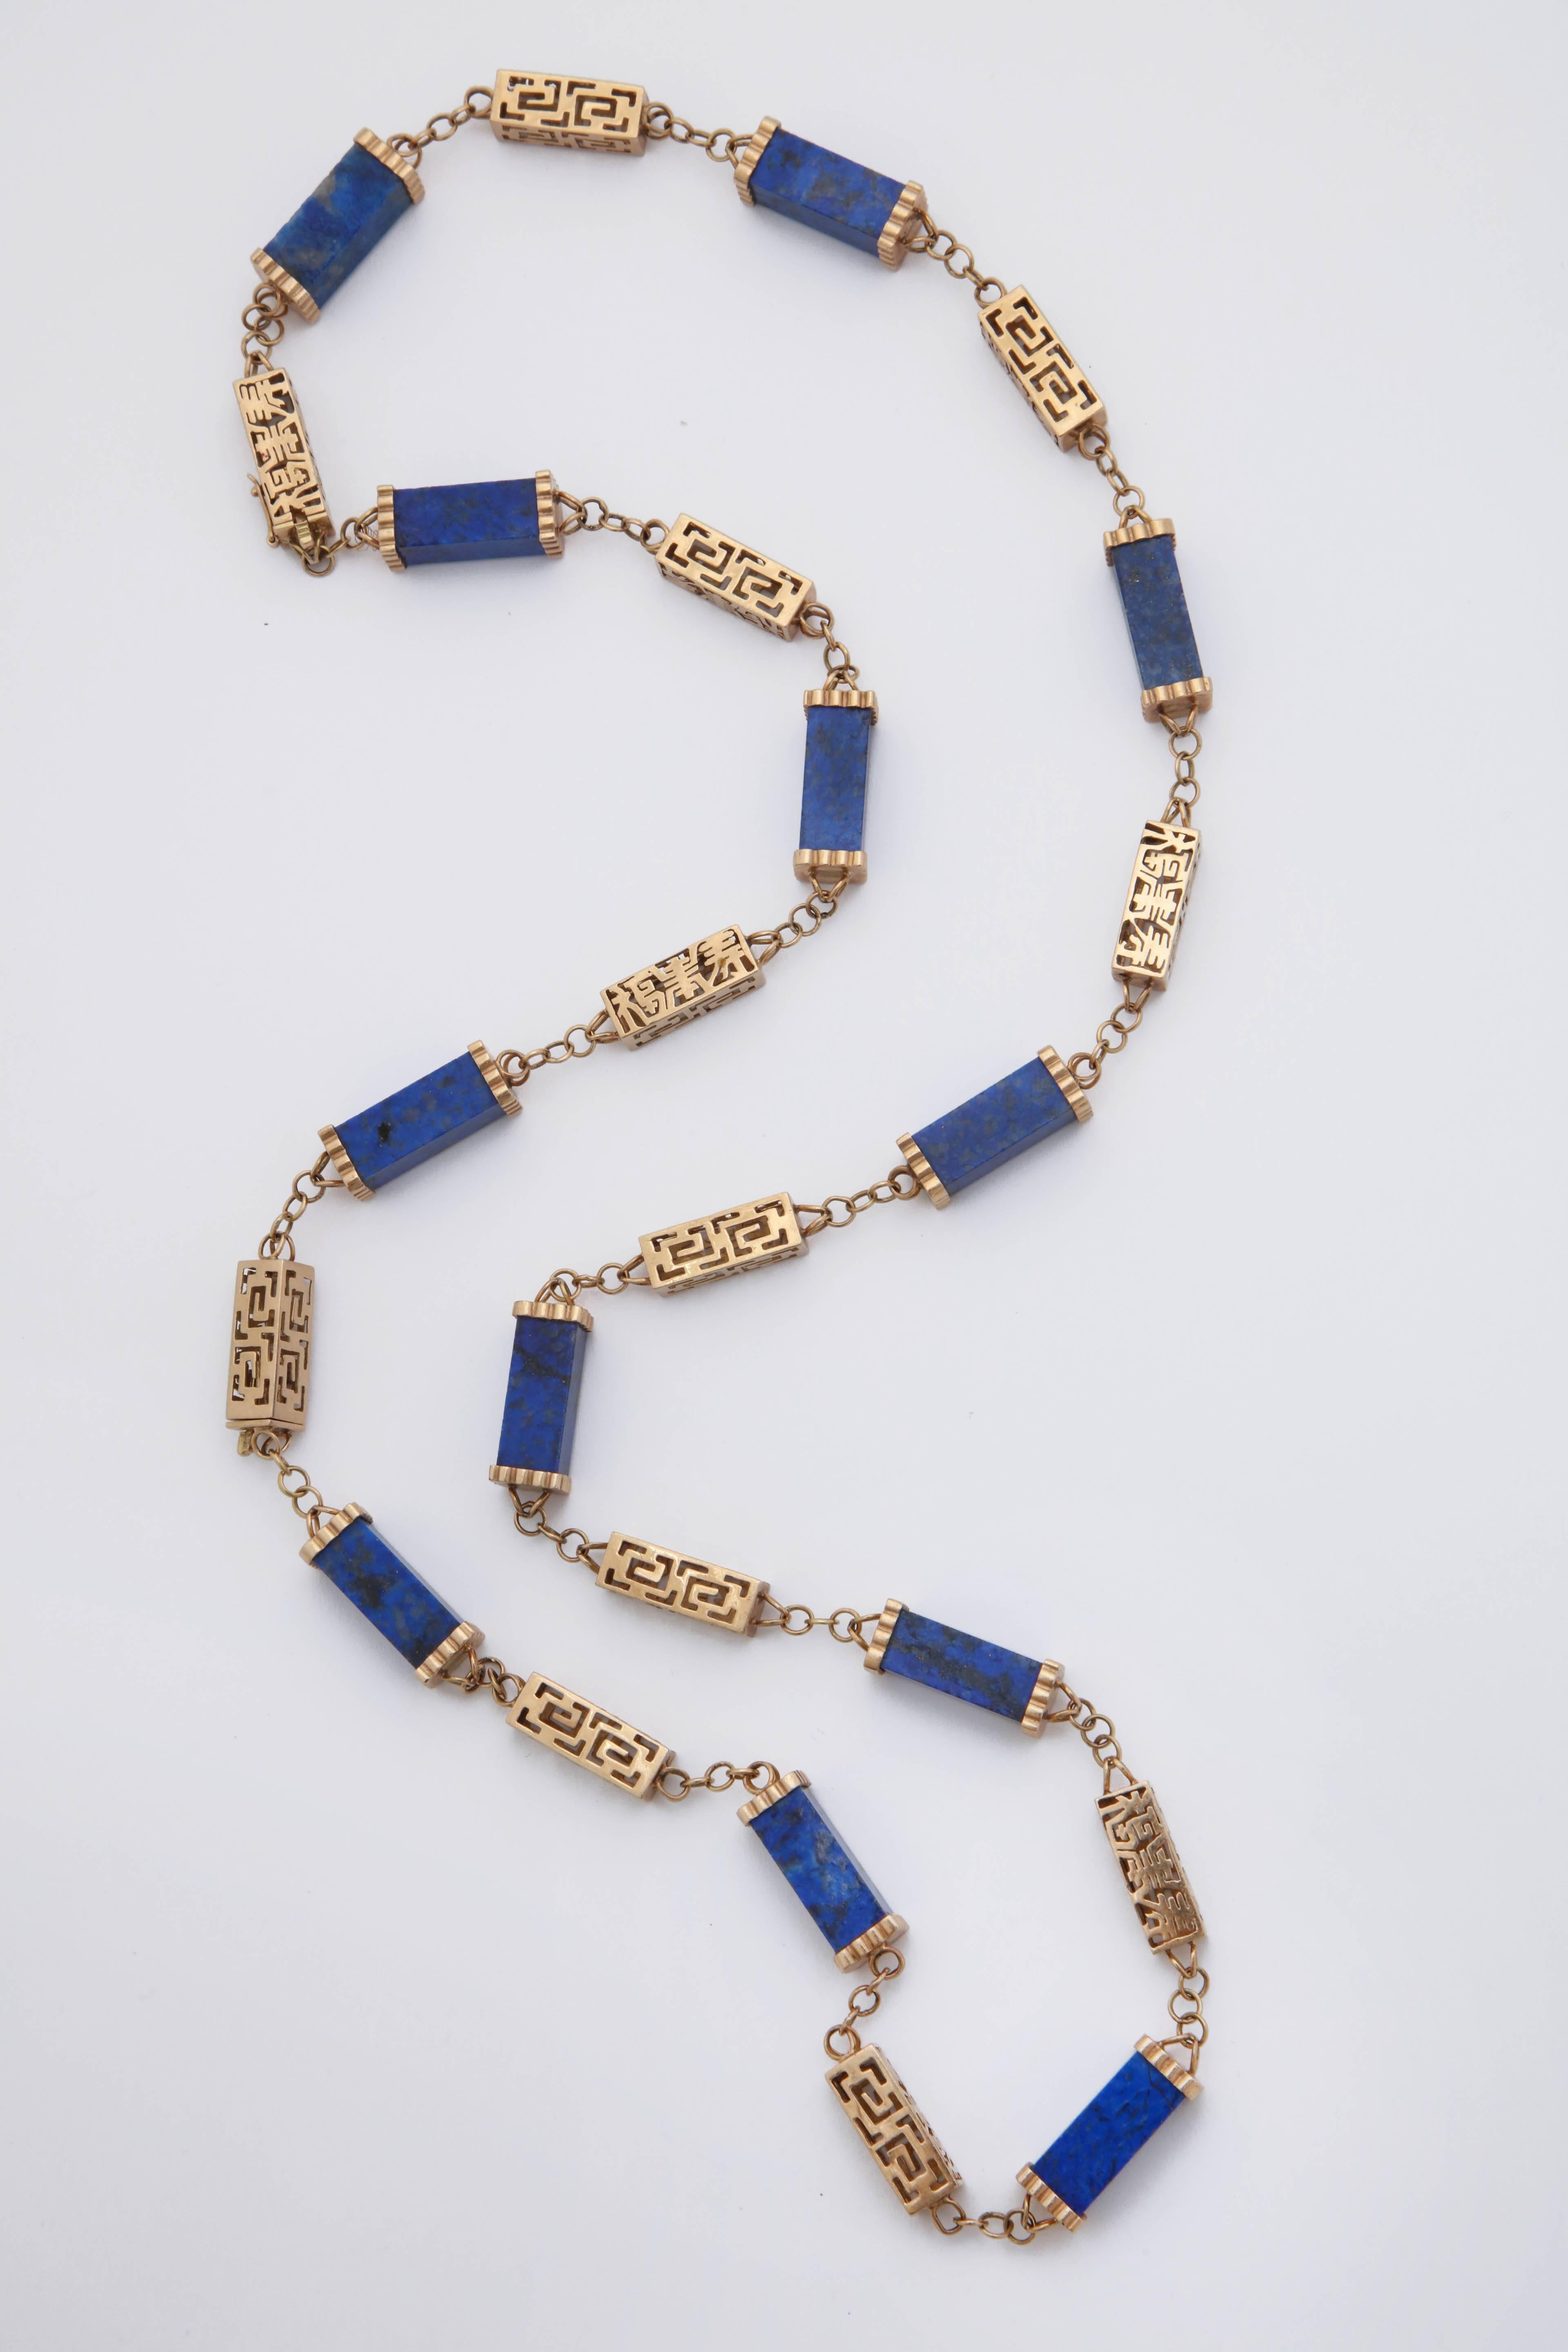 One 14kt Reticulated Gold Approximtely 31 Inch Chain with An Asian motif Style Design Composed Of 12 Three Dimensional Open Links And Further Designed with Alternating Three Dimensional Cynlinder Shaped Beautiful Color Lapis Lazuli Stones Measuring